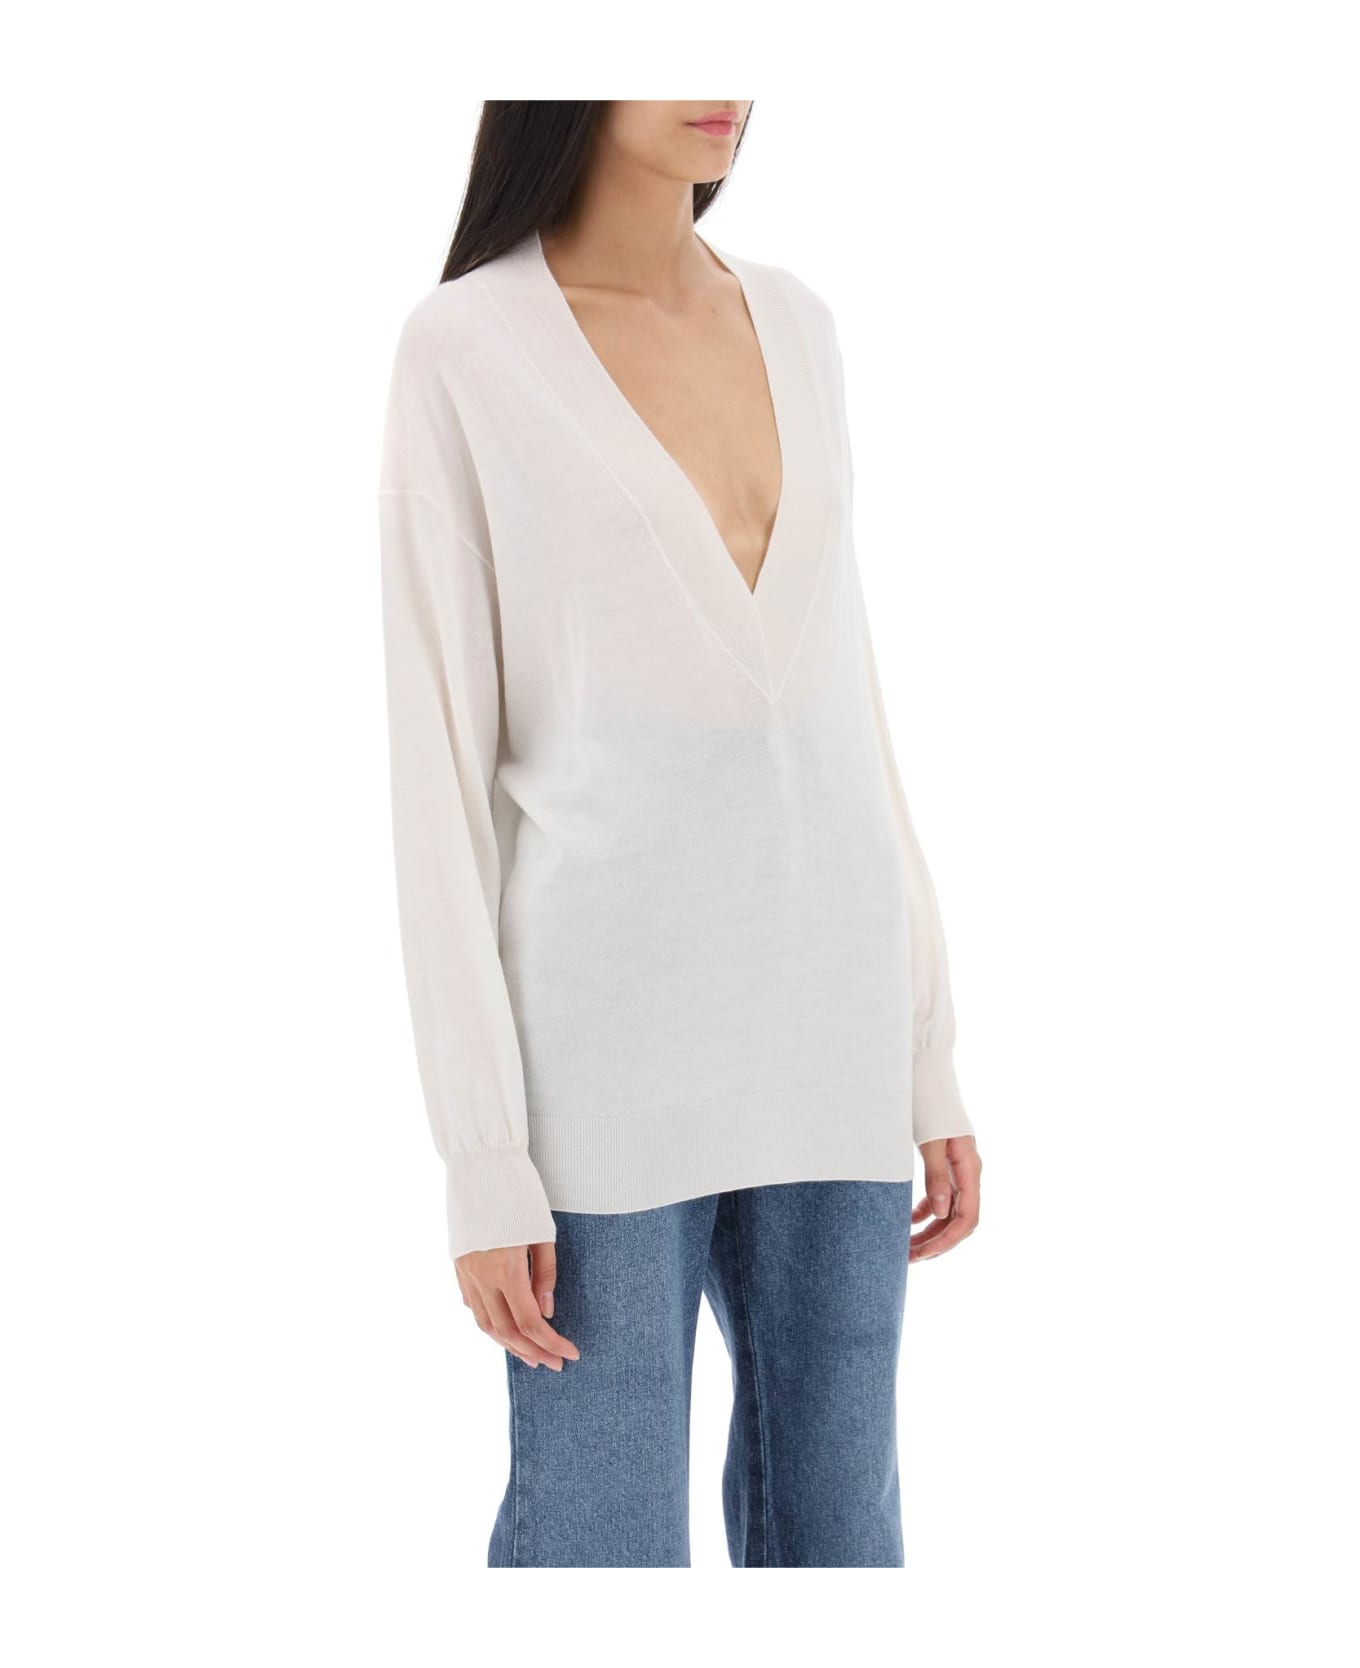 Tom Ford Sweater In Cashmere And Silk - CHALK (White) ニットウェア